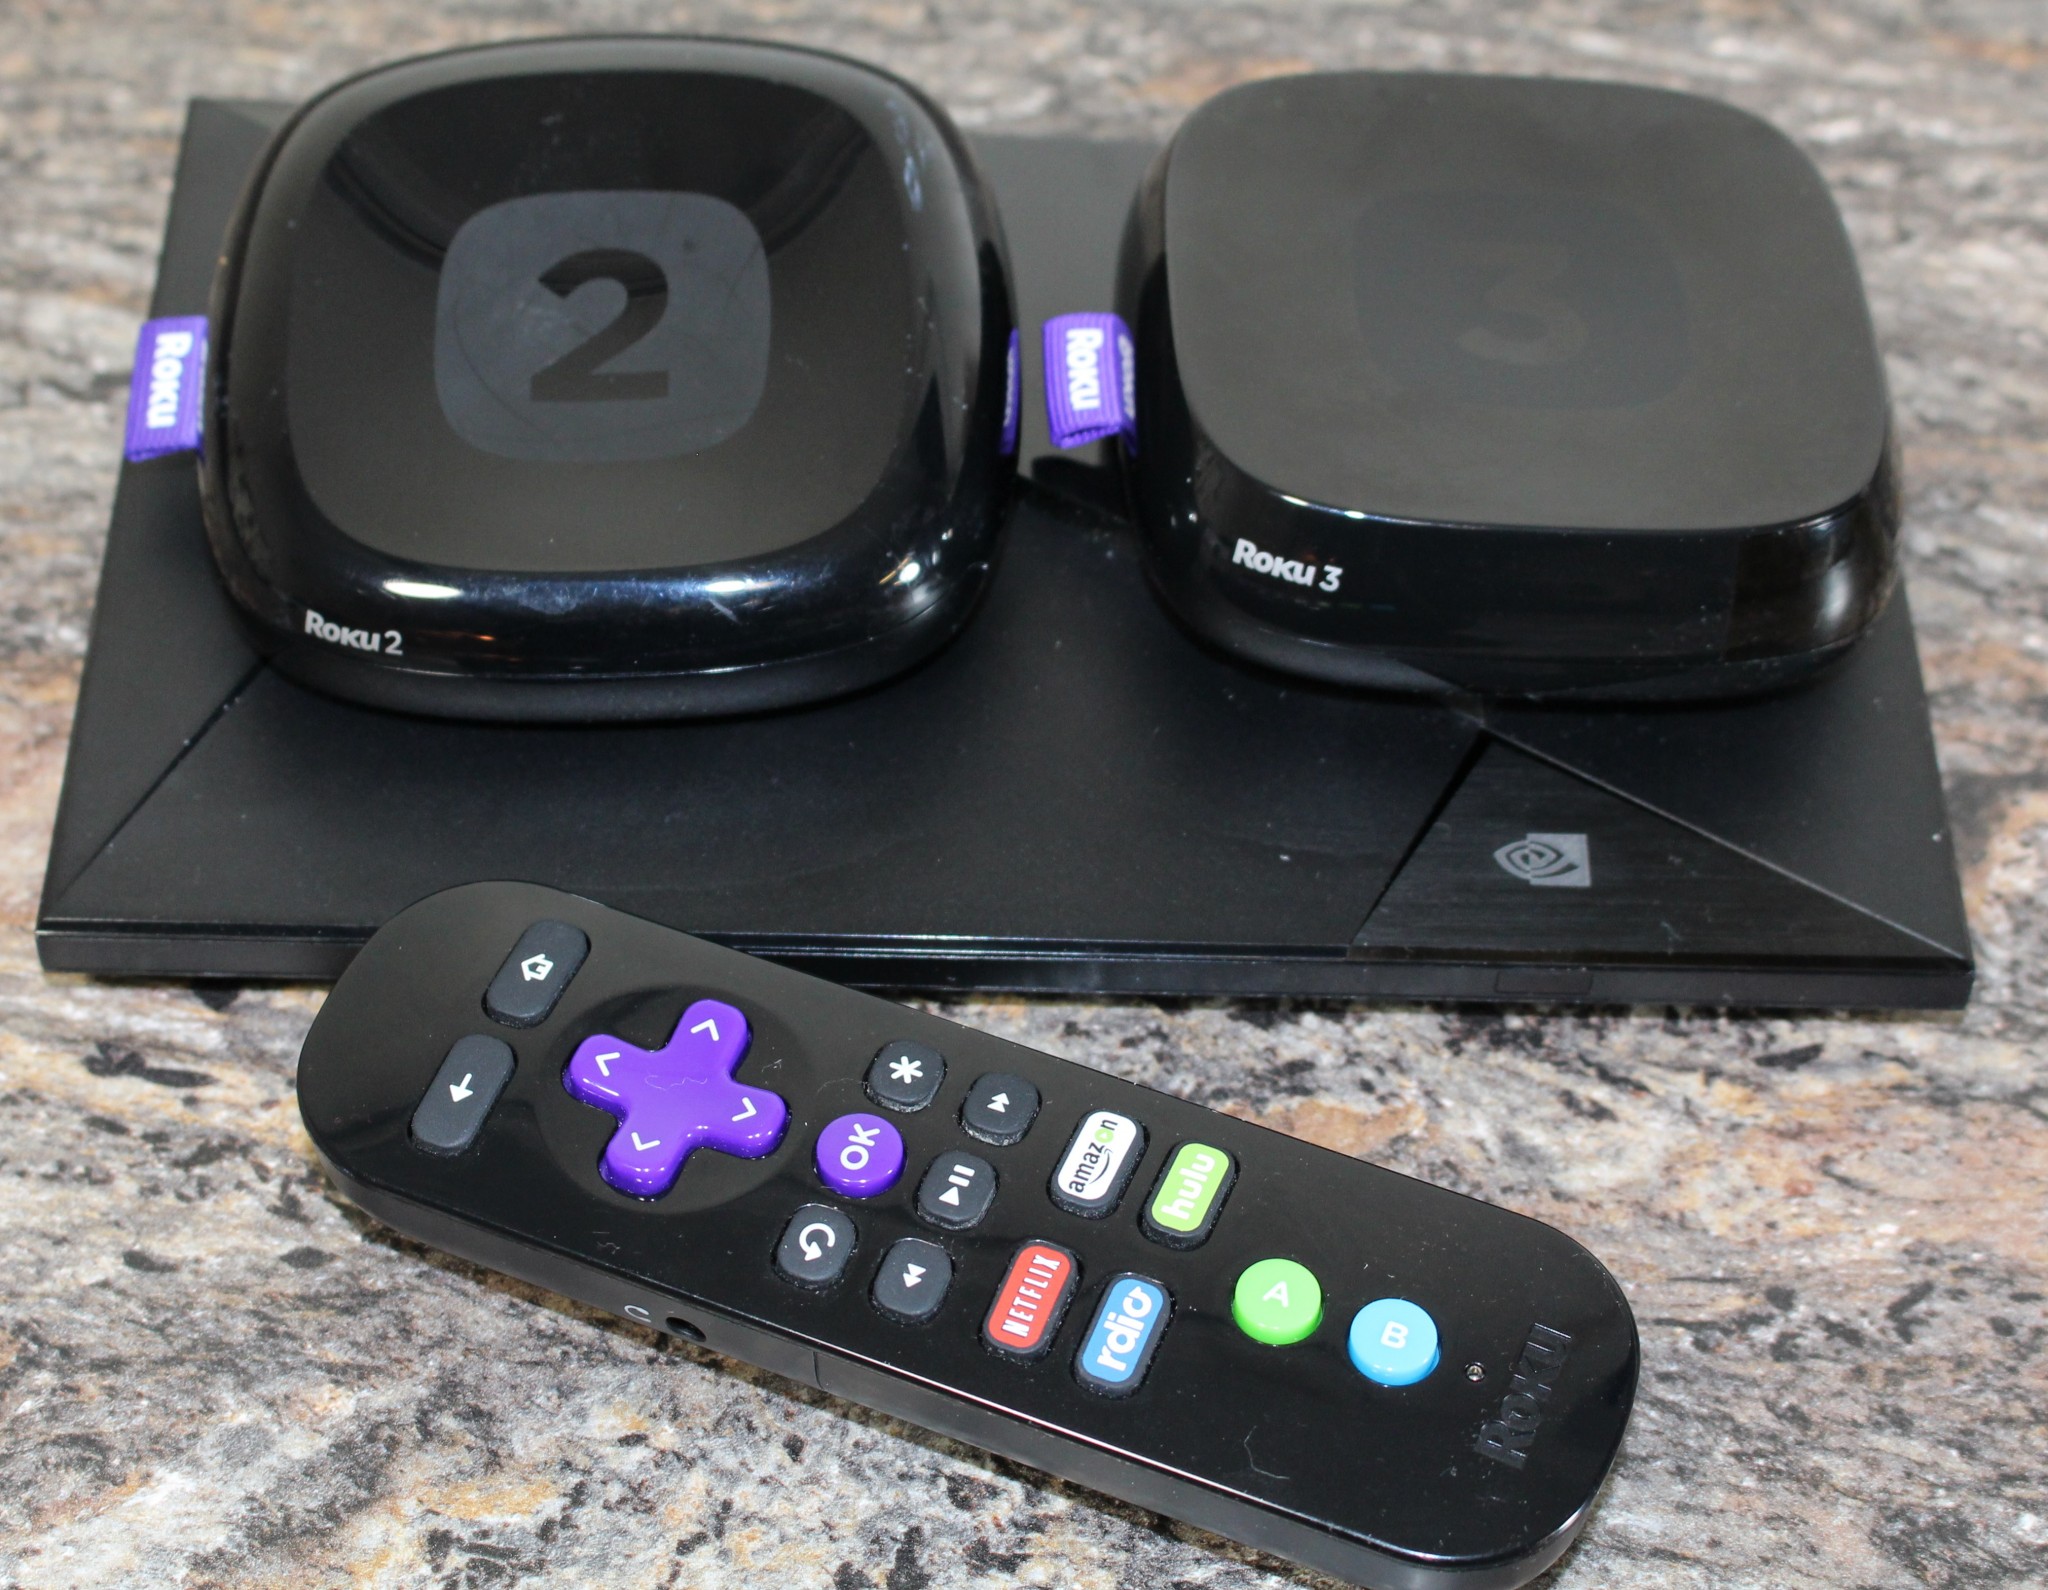 The Roku 4 is About The Size Of Two Roku 3s!